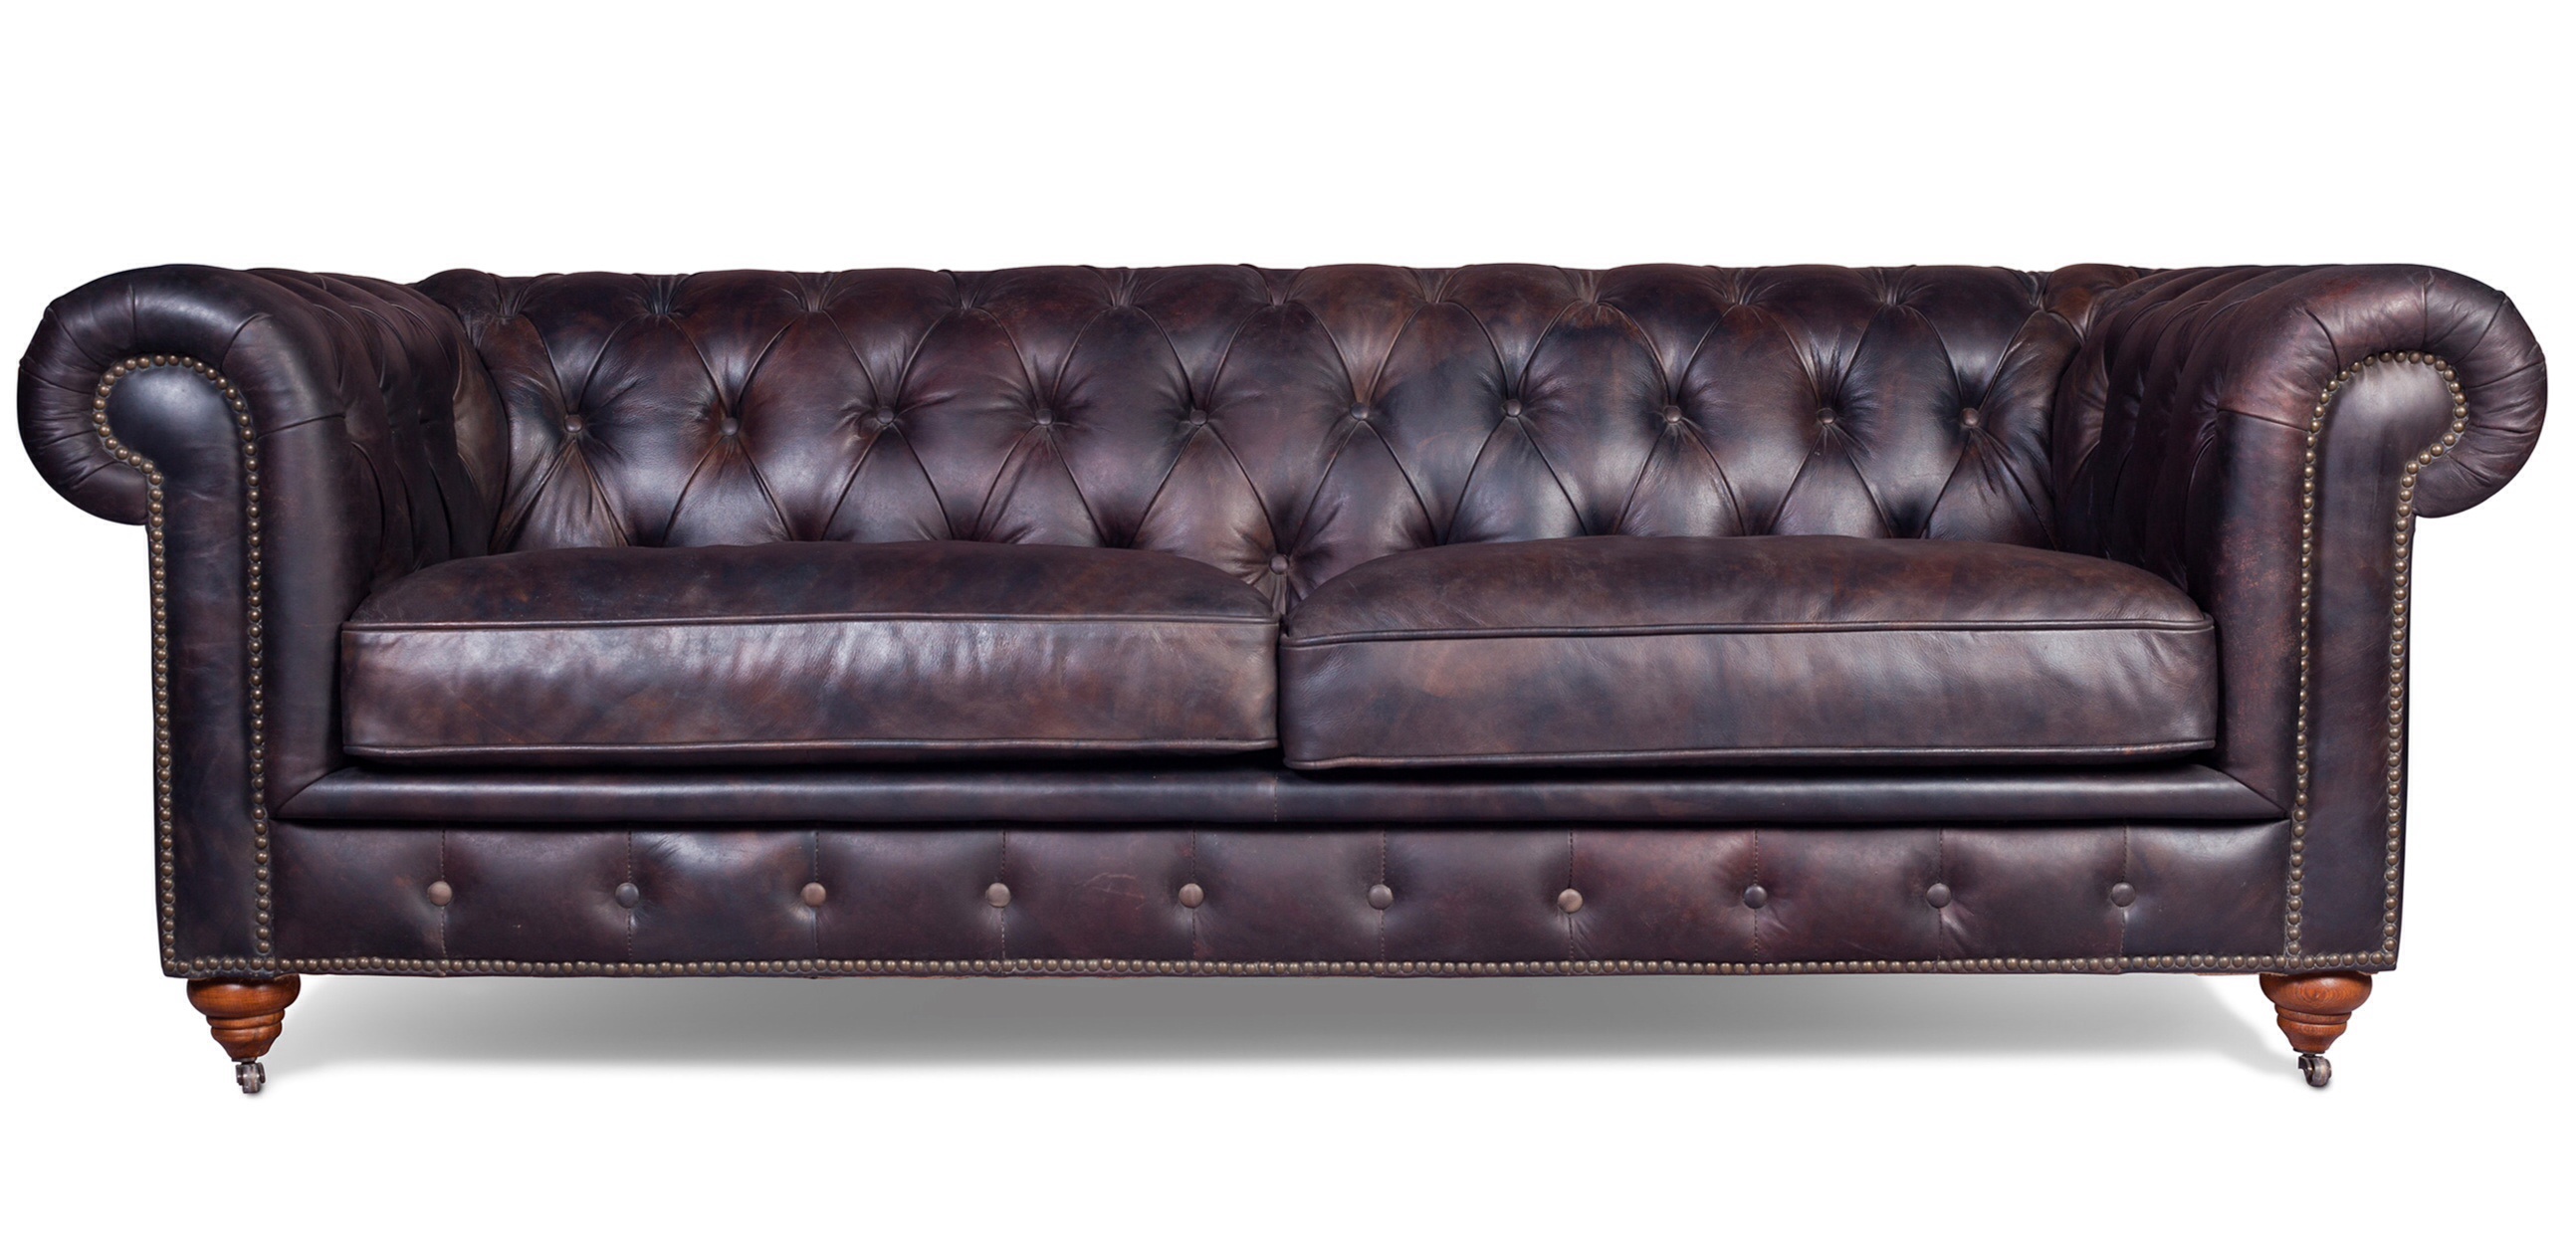 Chesterfield 2 seat sofa with quilted brown premium leather